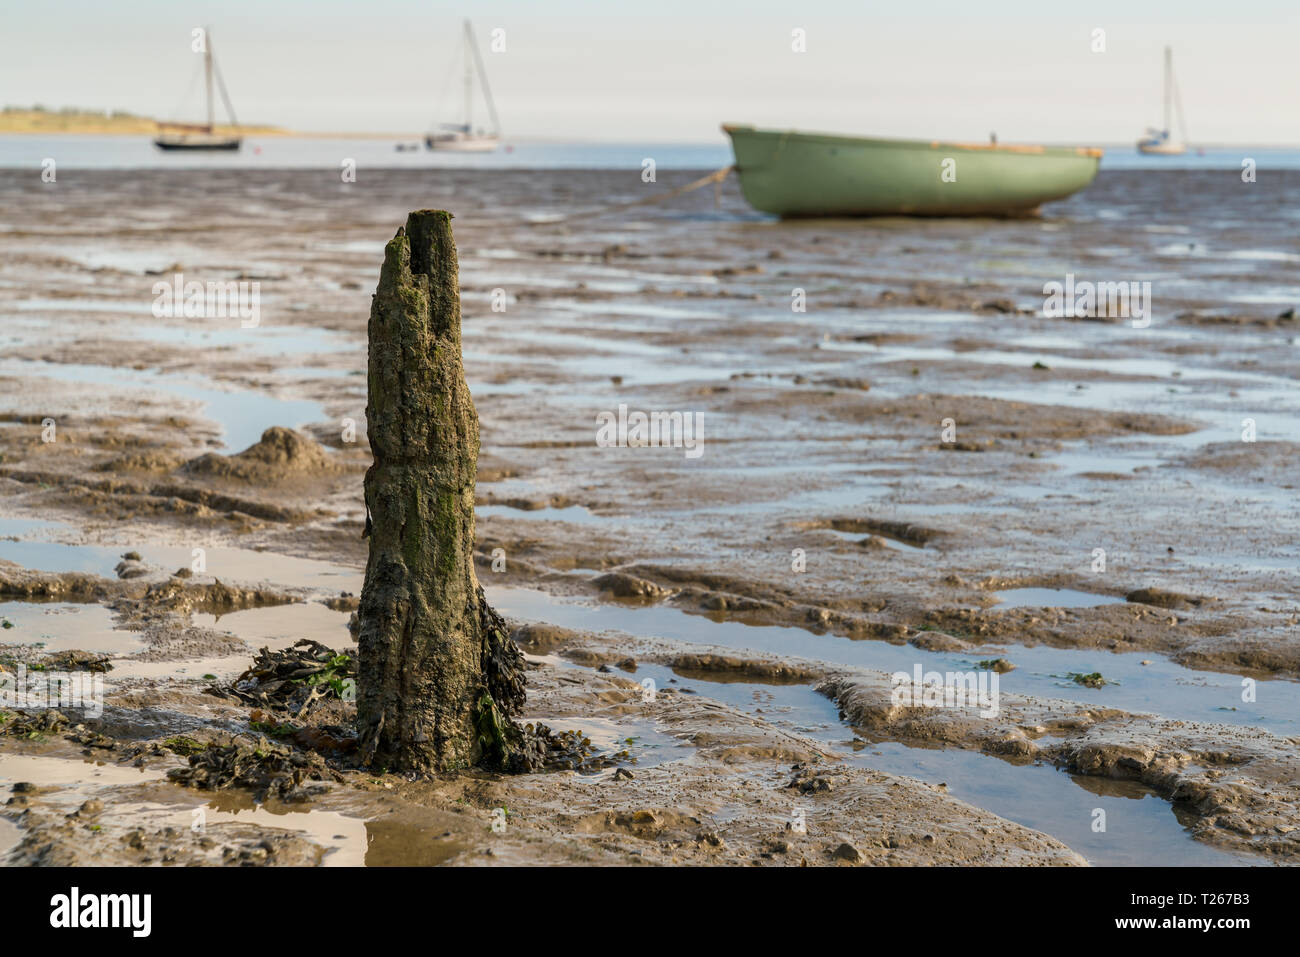 A wooden stake in the Oare Marshes at low tide near Faversham, Kent, England, UK - with some boats and the Isle of Sheppey in the background Stock Photo